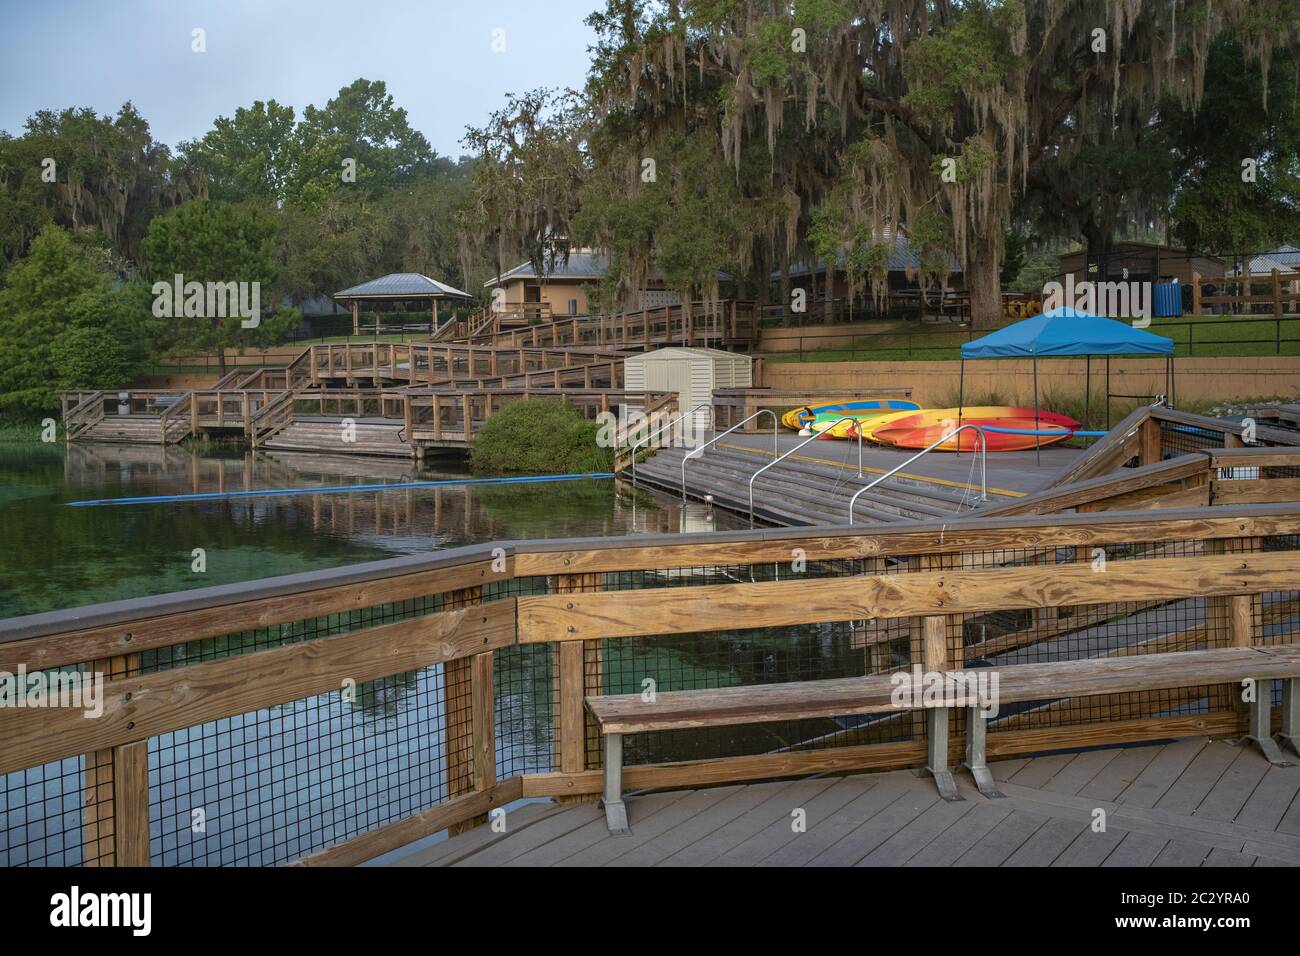 KP Hole Marion County Park. Dunnellon, Florida. On the Rainbow River. Early morning befor people arrive. Stock Photo